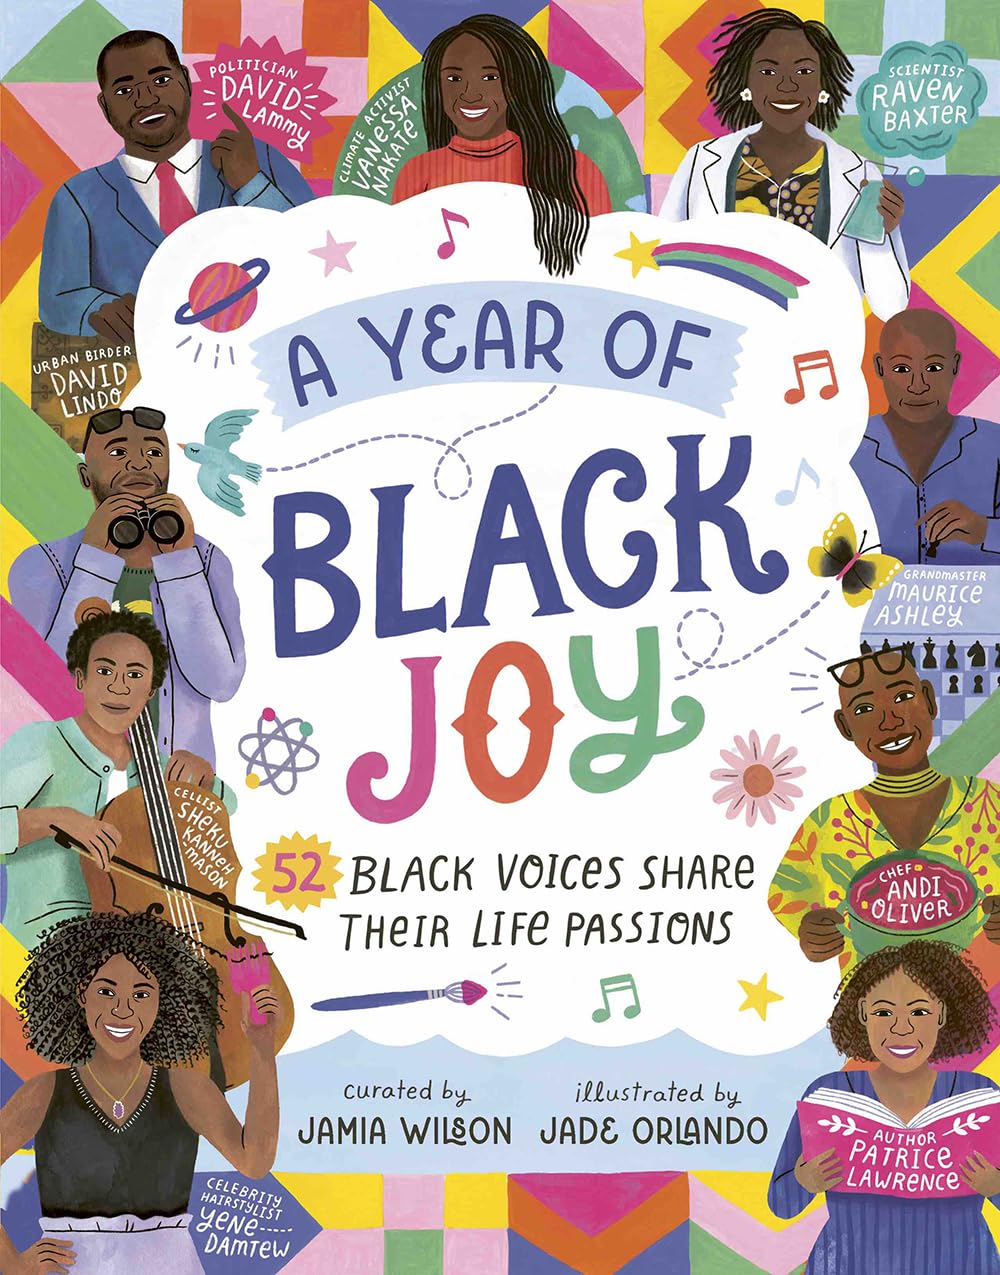 Image for "A Year of Black Joy"